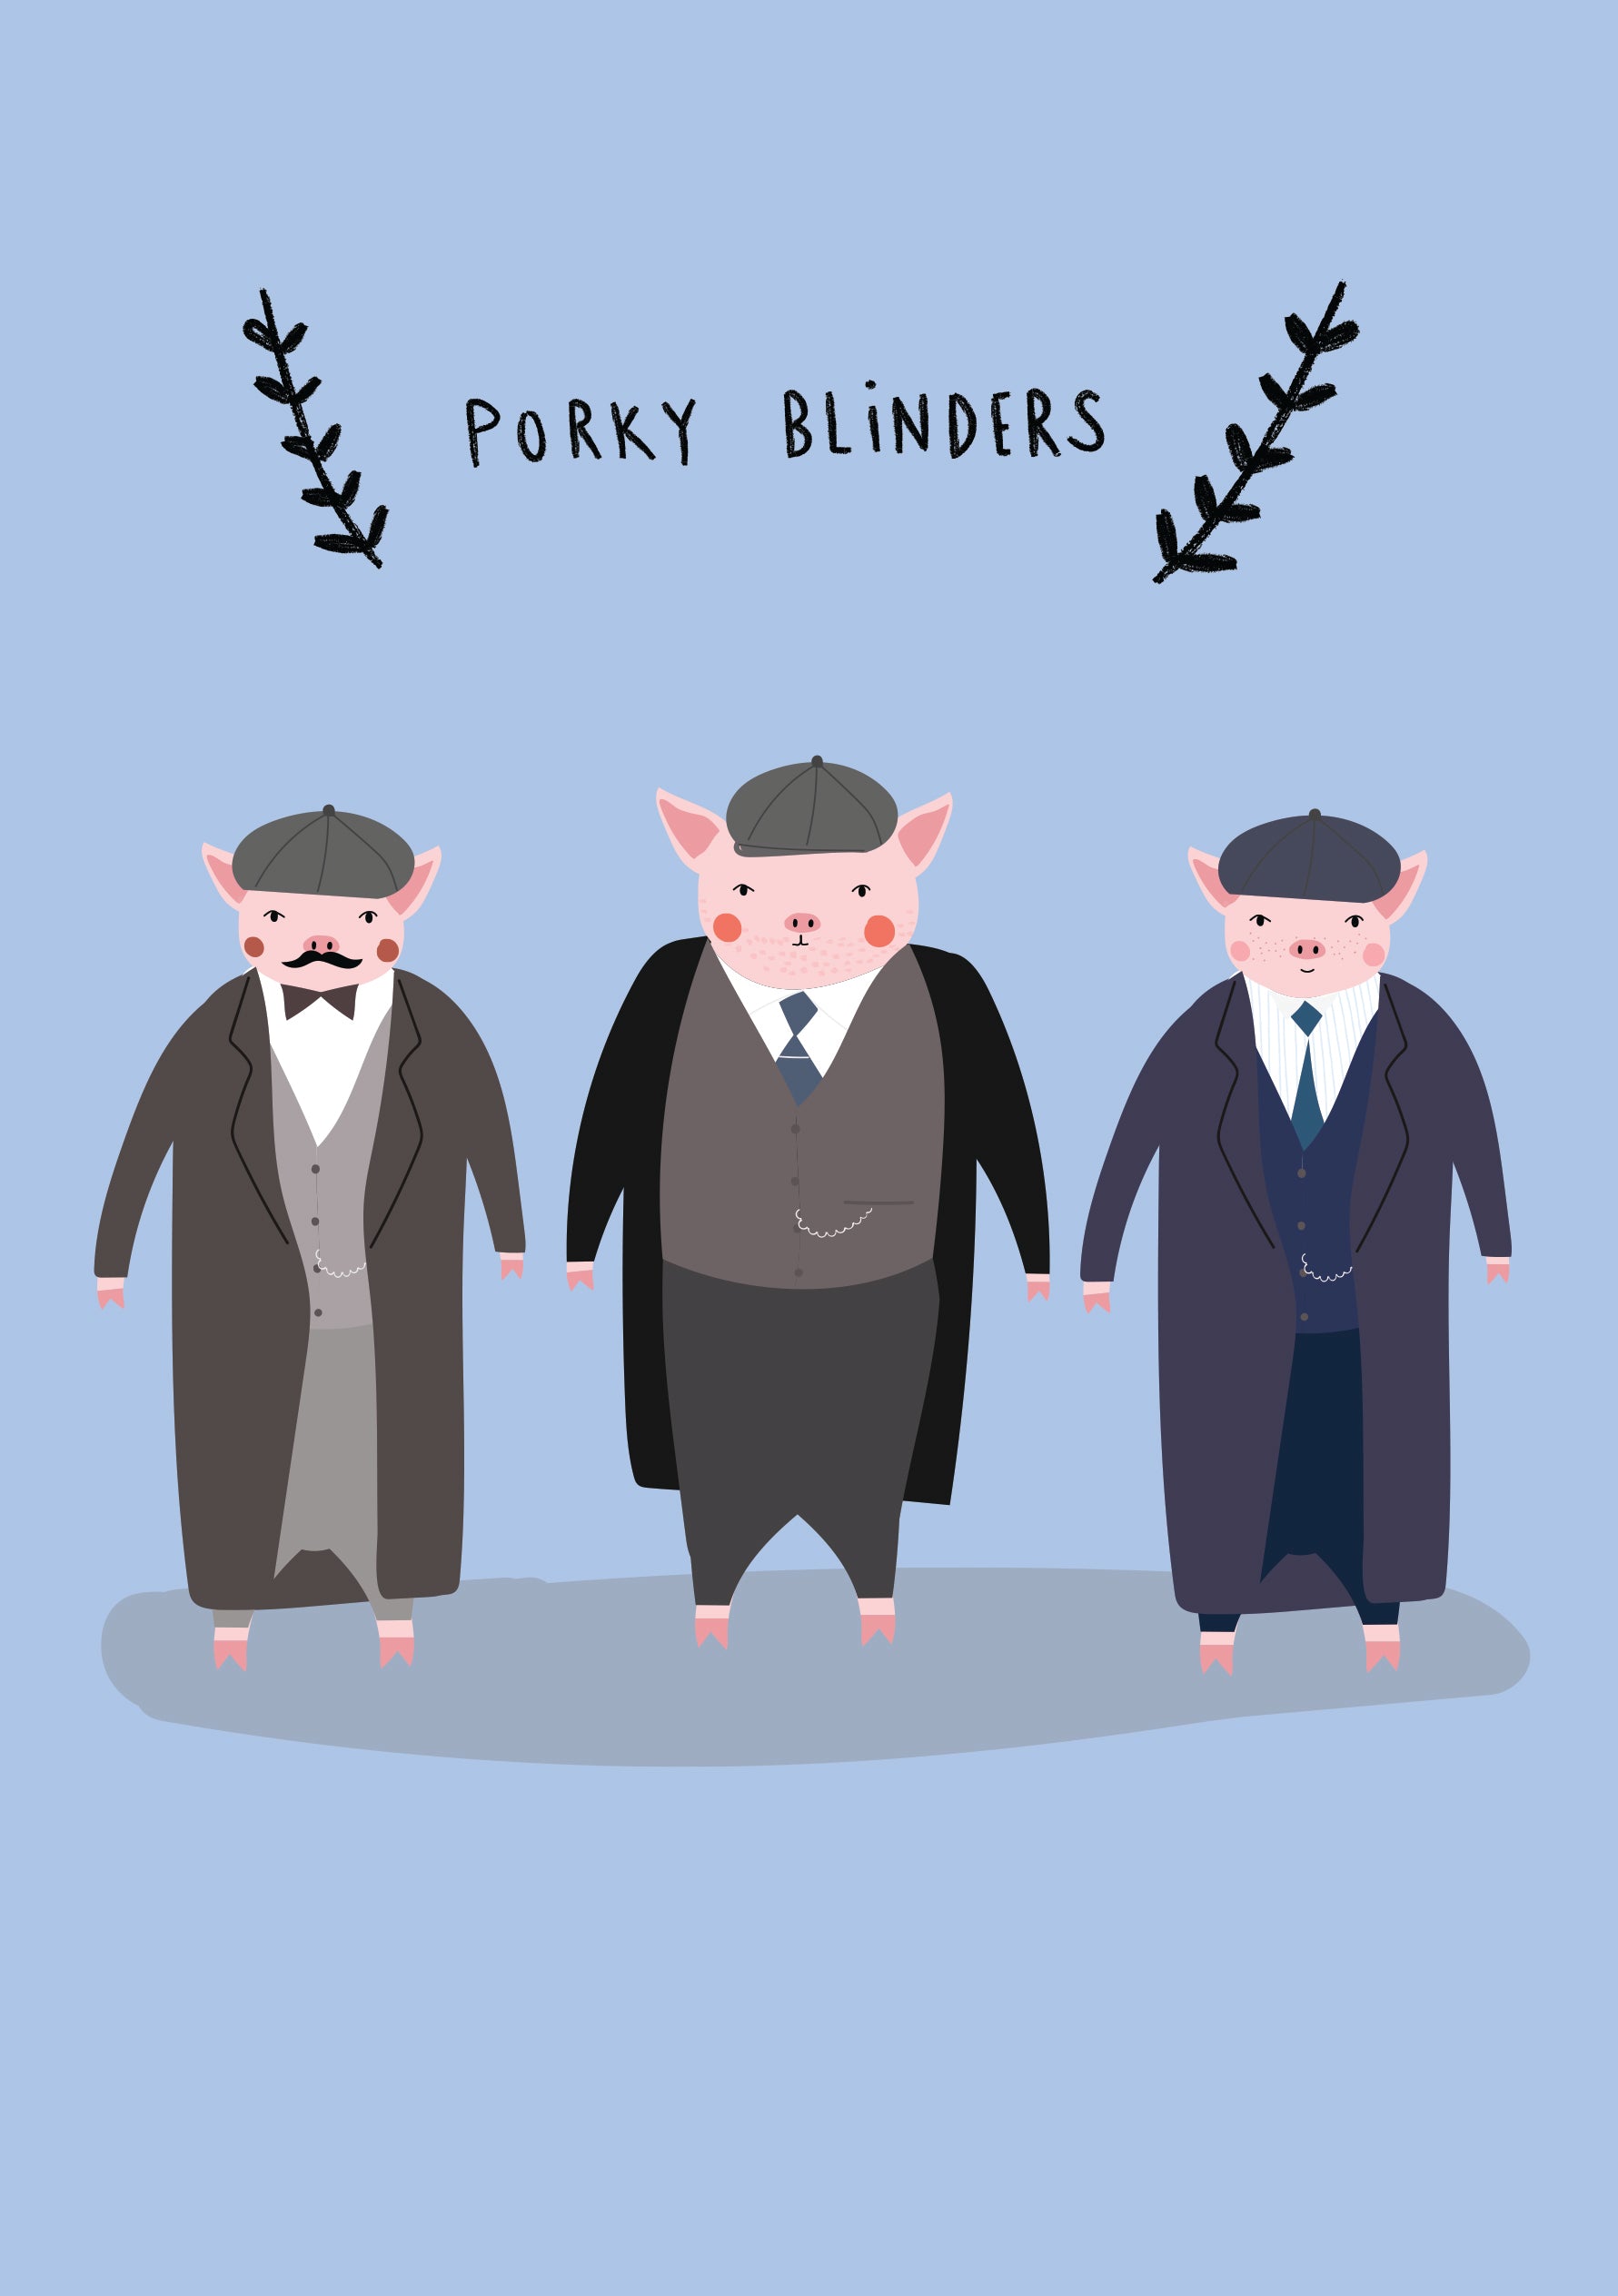 Porky Blinders Funny Card from Penny Black